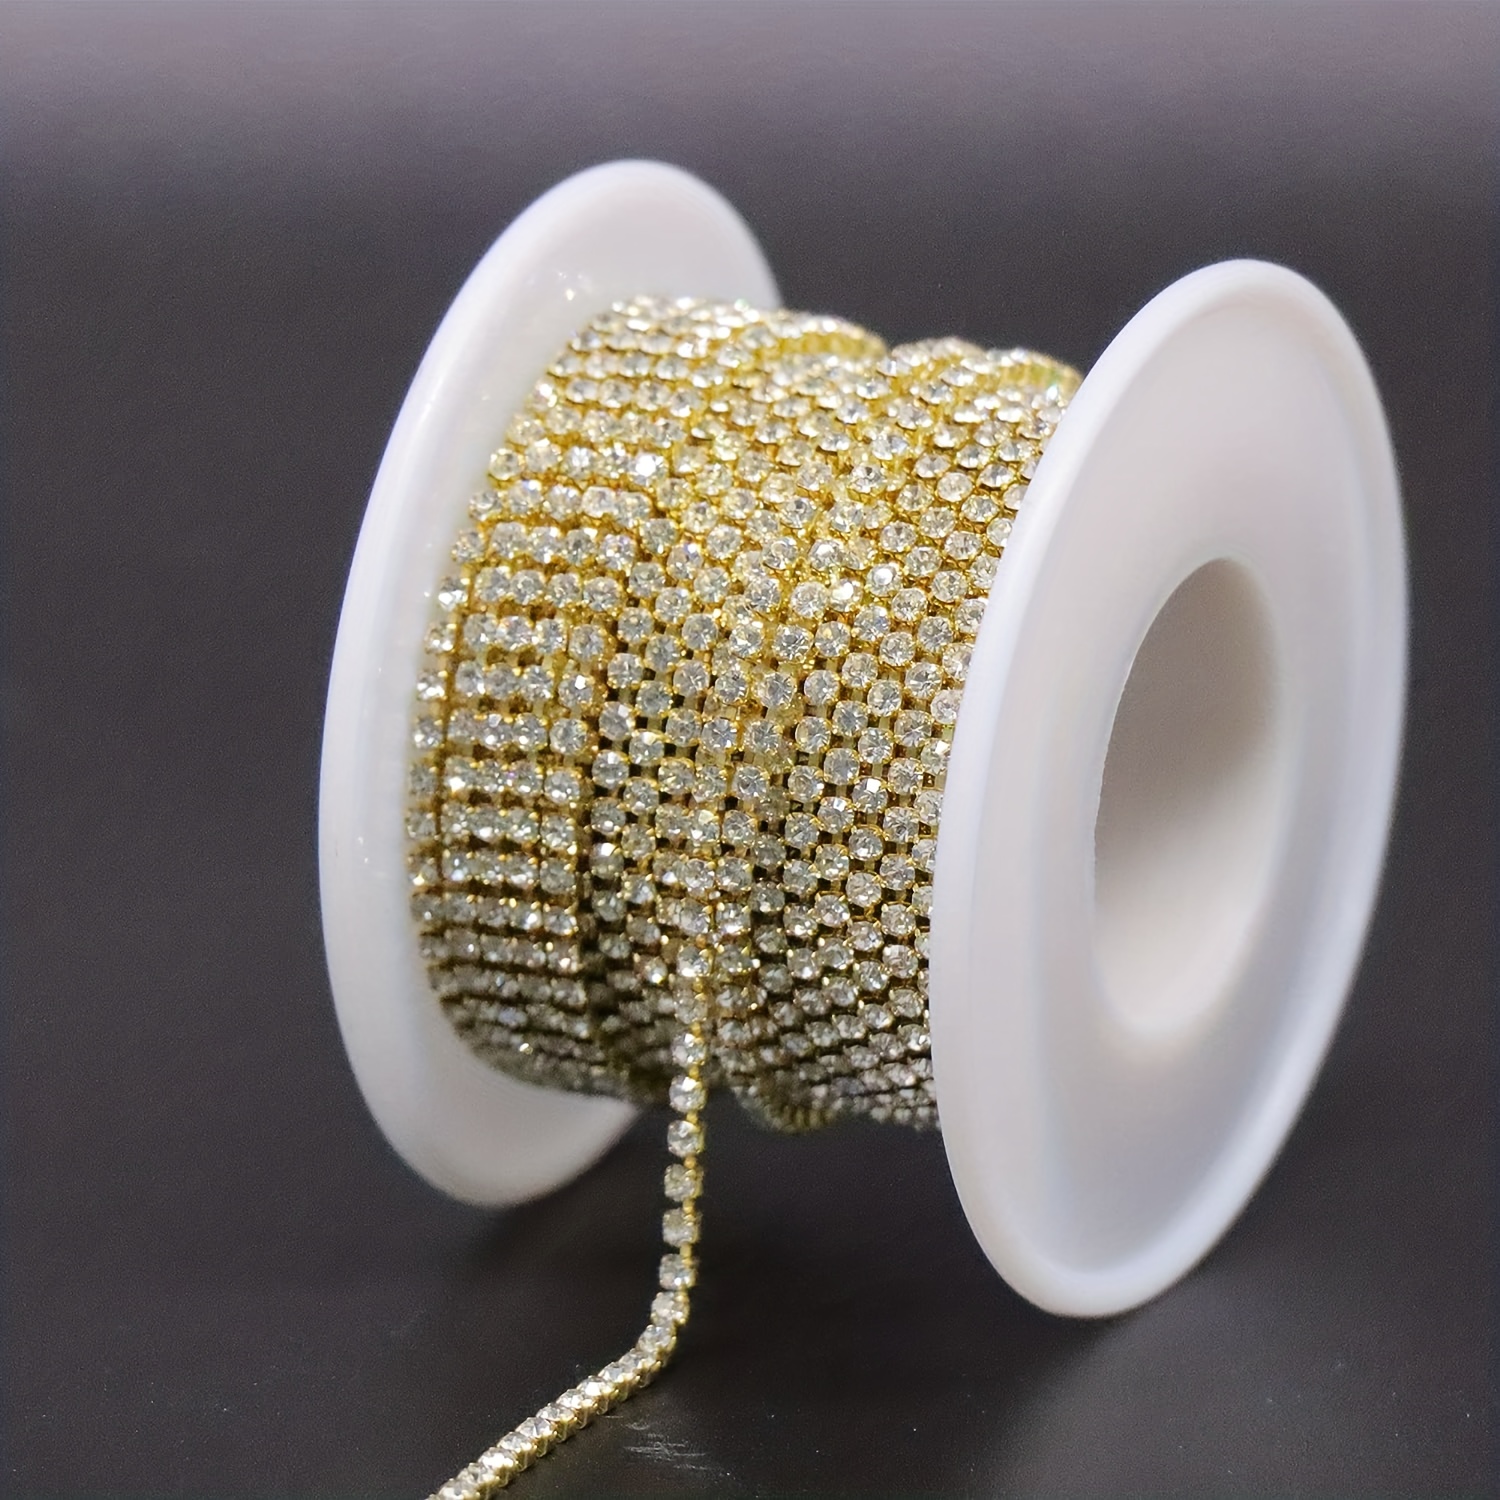 11 Yards Rhinestone Chain Gold Trim String for DIY Jewelry Making Crafts Shoe Charms (2mm Wide)